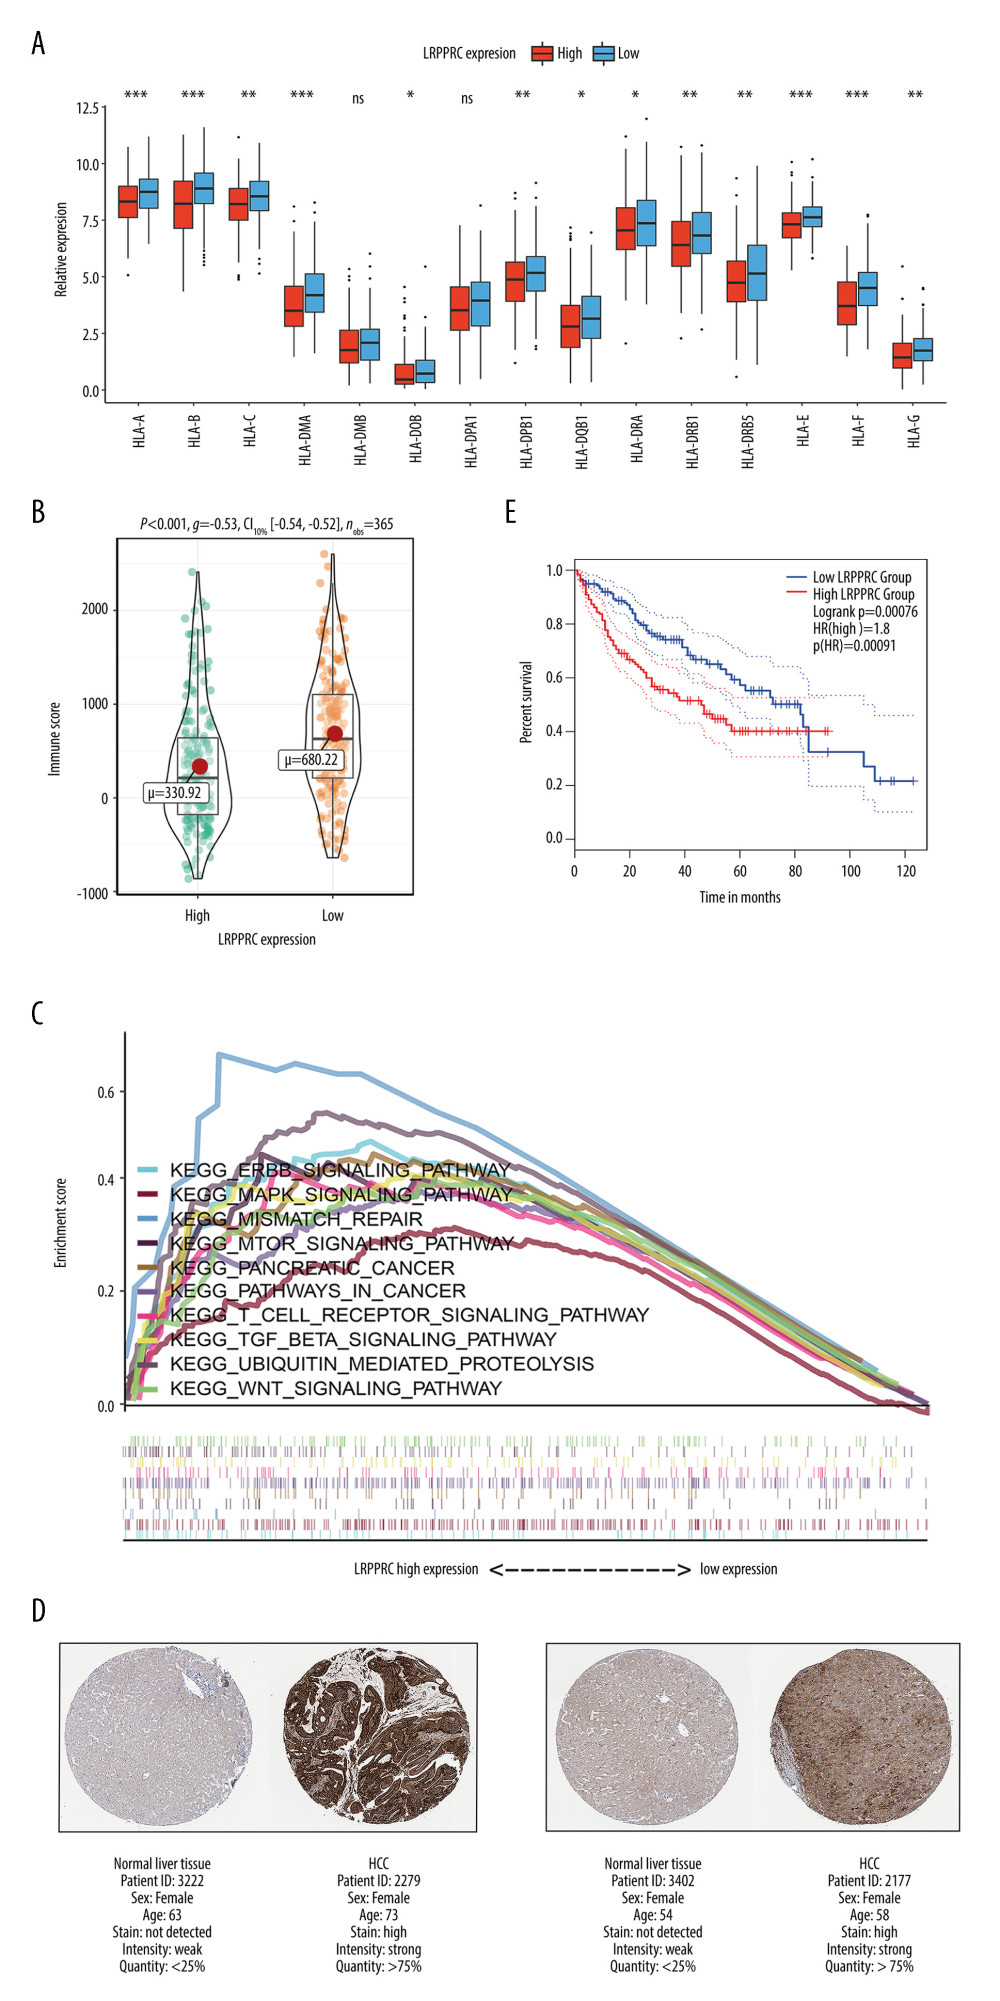 Potential roles of the LRPPRC N6-methyladenosine (m6A) modulator in immune microenvironment formation and hepatocarcinogenesis. (A) Differences in human leukocyte antigen molecule expression between LRPPRC high-expression and low-expression groups. (B) Differences in immune components between LRPPRC high-expression and low-expression groups. (C) Gene set enrichment analysis reveals the significant Kyoto Encyclopedia of Genes and Genomes pathways enriched in patients with high LRPPRC expression. (D) Representative LRPPRC immunohistochemical staining in normal liver tissues and those from patients with hepatocellular carcinoma in the Human Protein Atlas database. (E) Kaplan-Meier curve survival analyses for The Cancer Genome Atlas cohort patients with high and low LRPPRC expression. R (version 3.6.1) software was used to create the pictures.